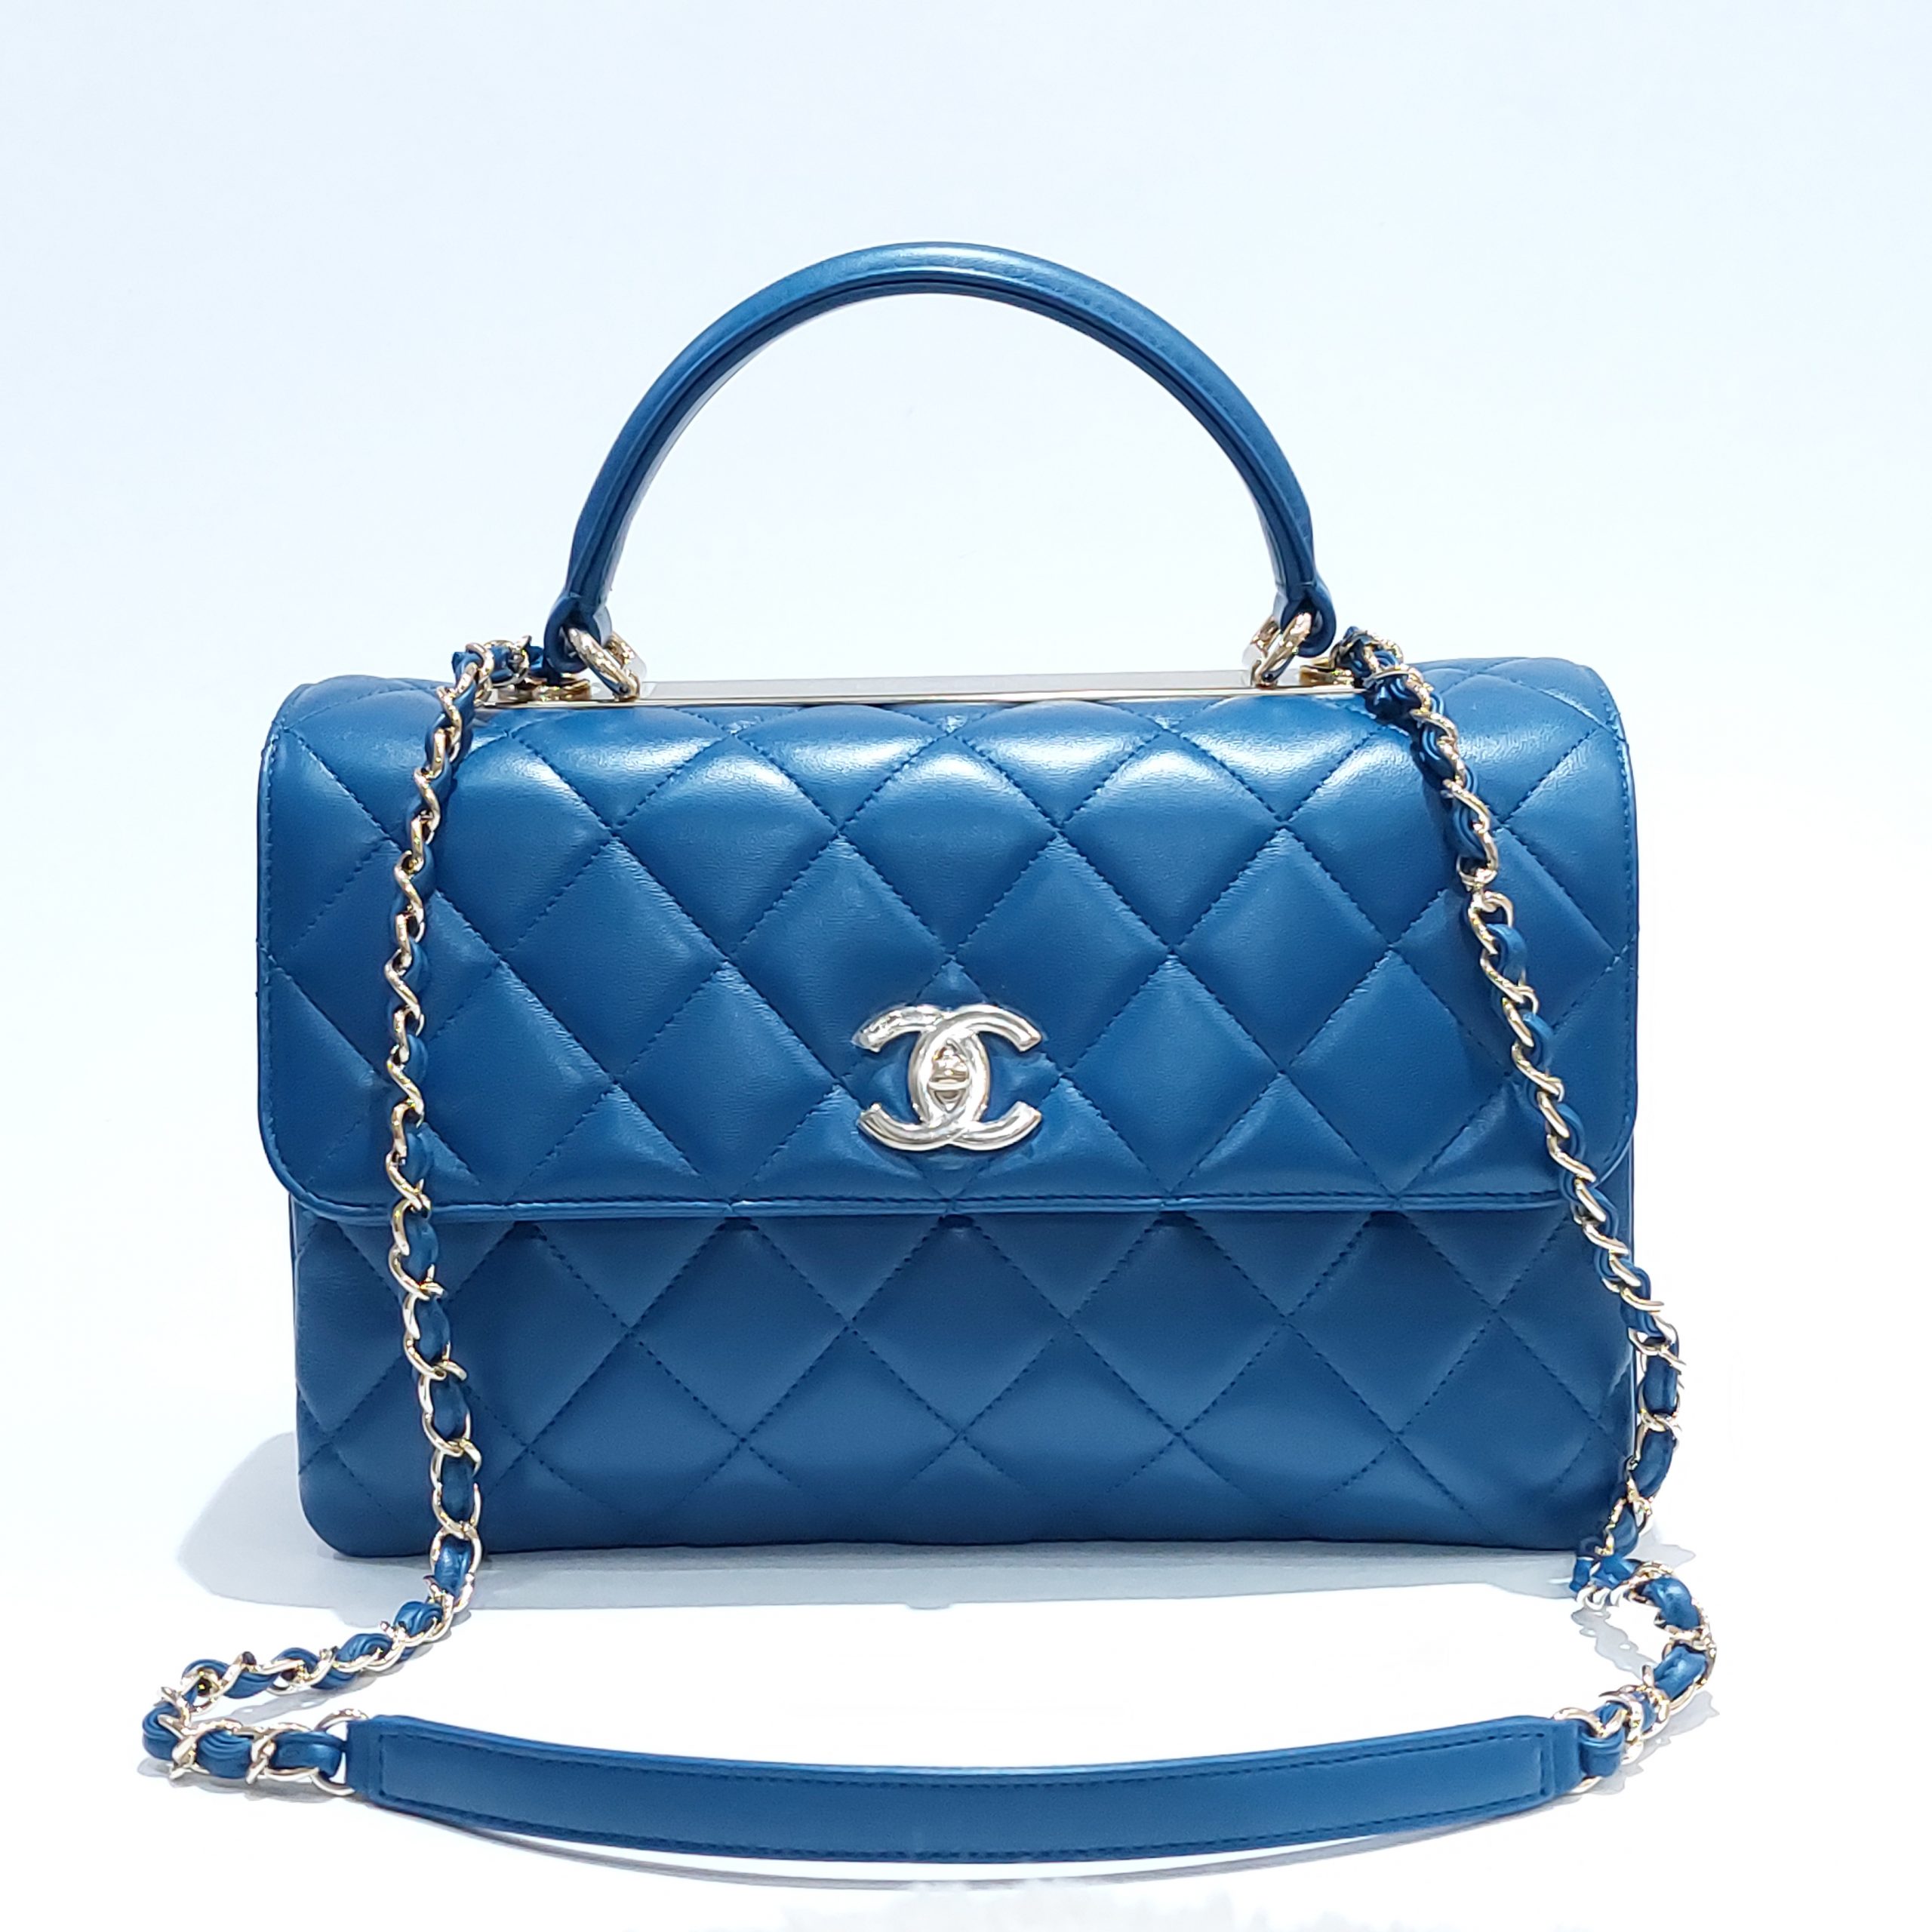 Chanel Shoulder Bag Top Handle AS4066 B13633 NQ337, Blue, One Size